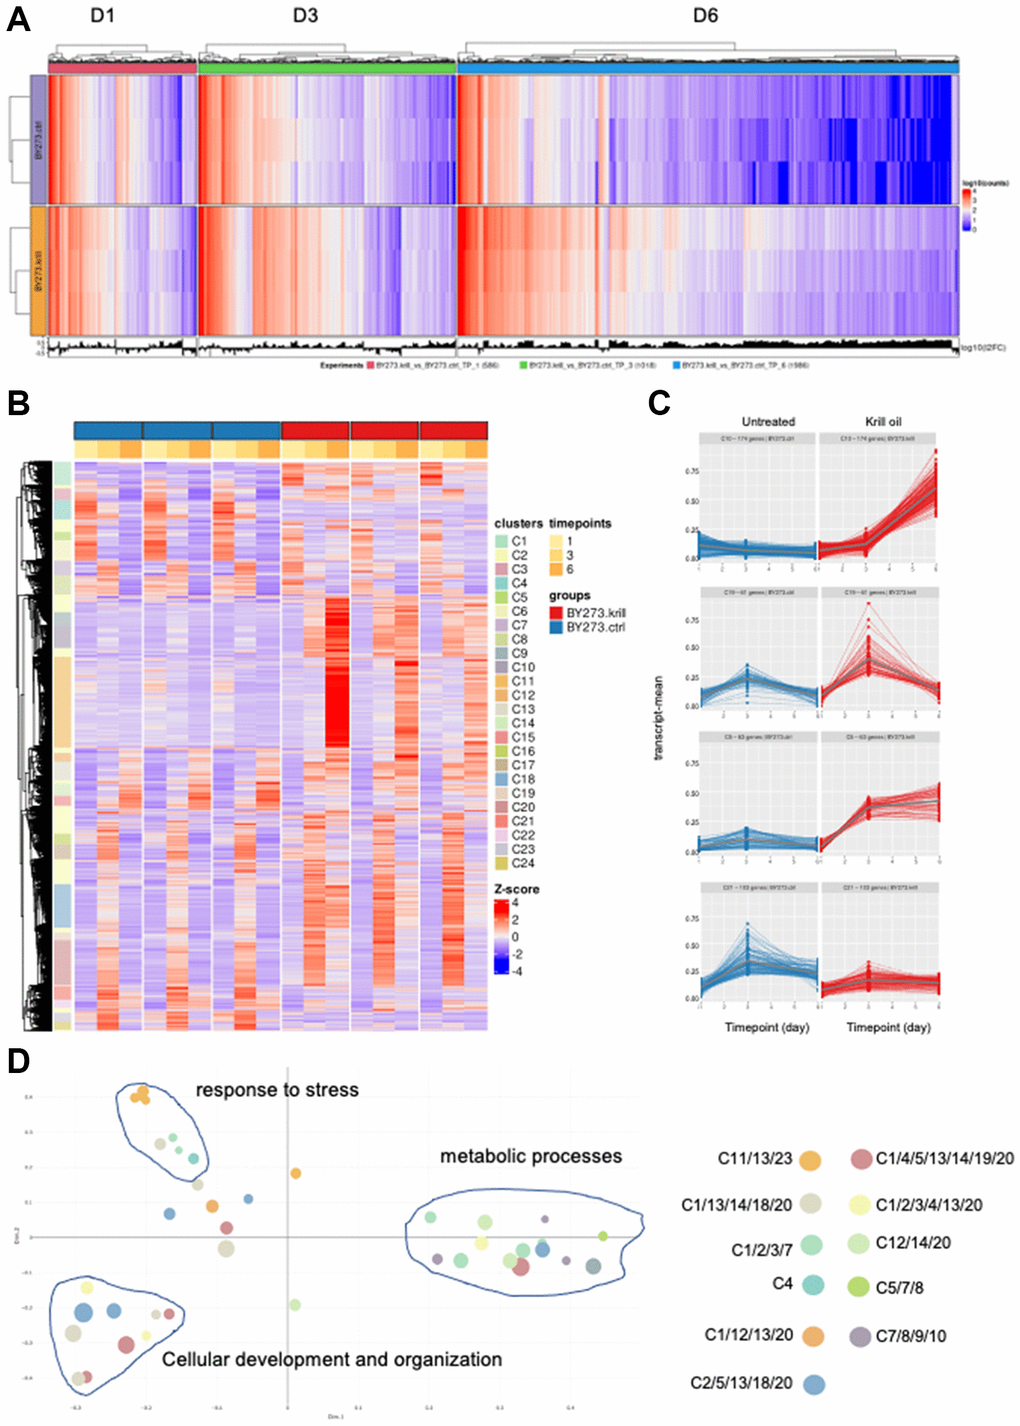 Krill oil alters genes regulation. (A) Differentially expressed genes (DEG) in PD animals in the presence and absence of krill oil treatment in day 1, day 3 and day 6 old animals. (B) Heat map of the time series analyses comprising all DEGs revealing 24 co-regulated clusters. (C) Examples of clusters (C10, C19, C5 and C21) with typical trajectories in PD animals. (D) Represents multi-dimensional scaling (MDS) plots showing all GOs and separating them based on clusters having similar functions.